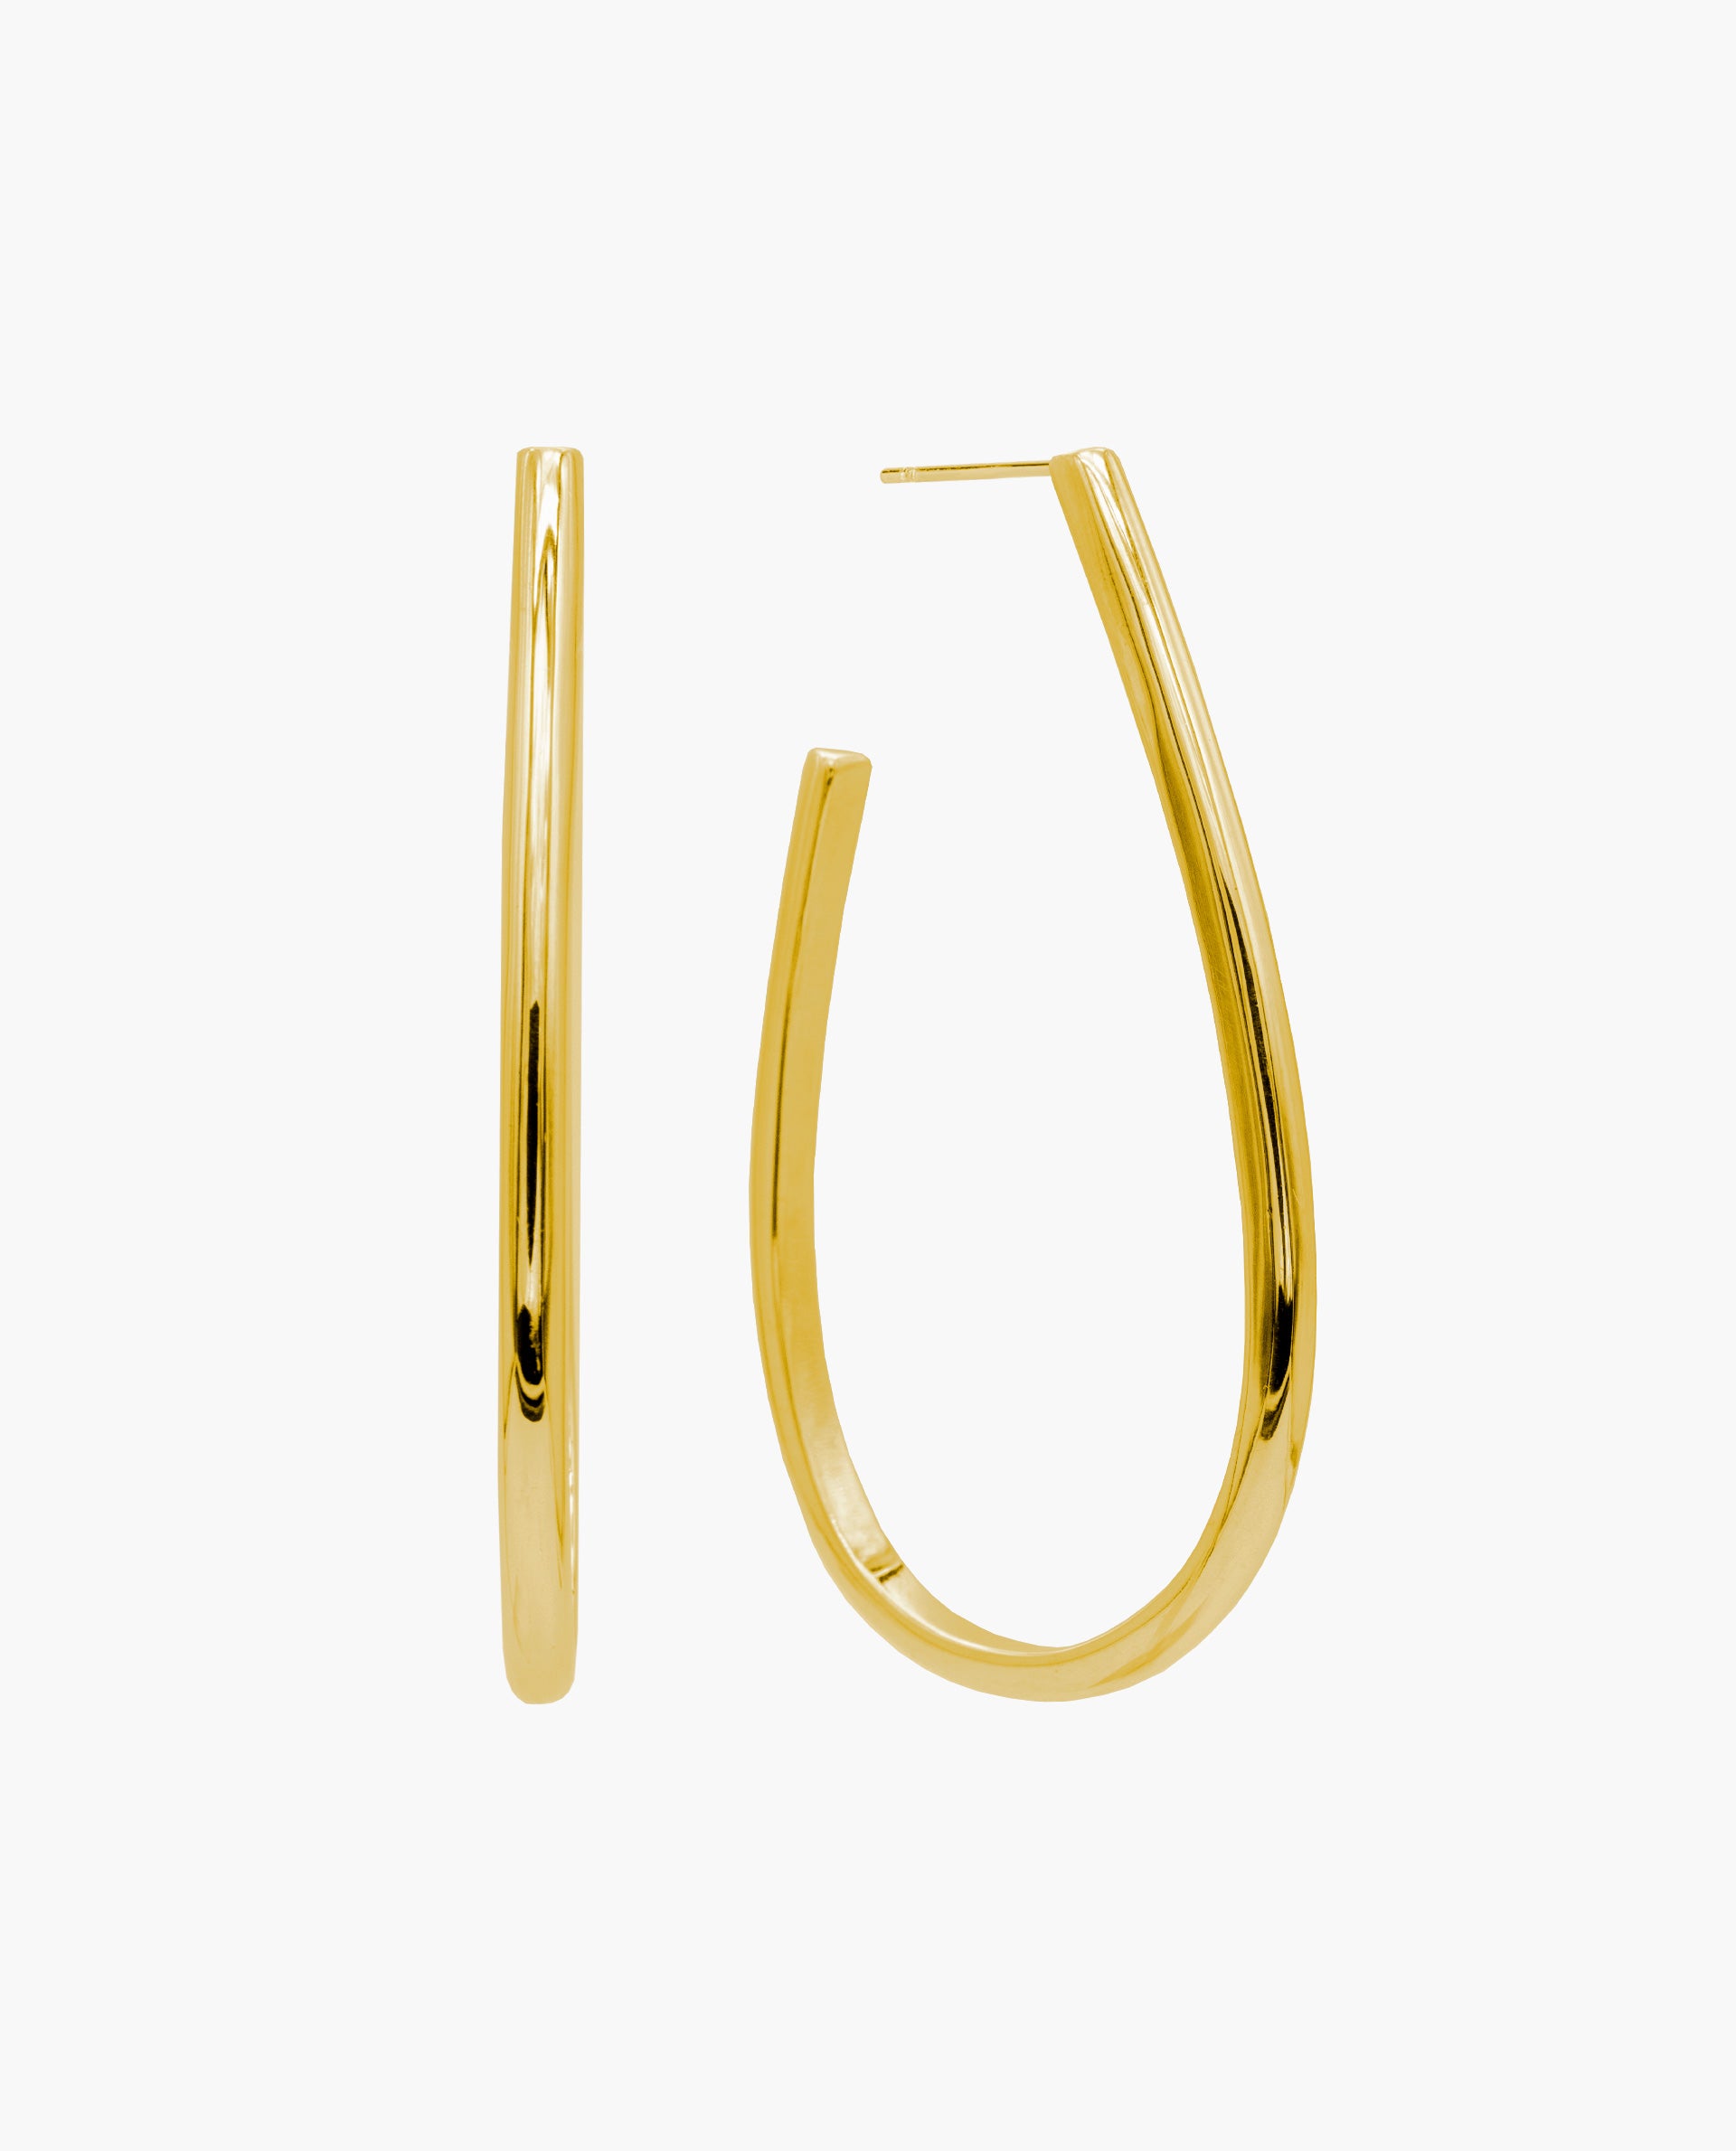 DROP EARRINGS - GOLD PLATED